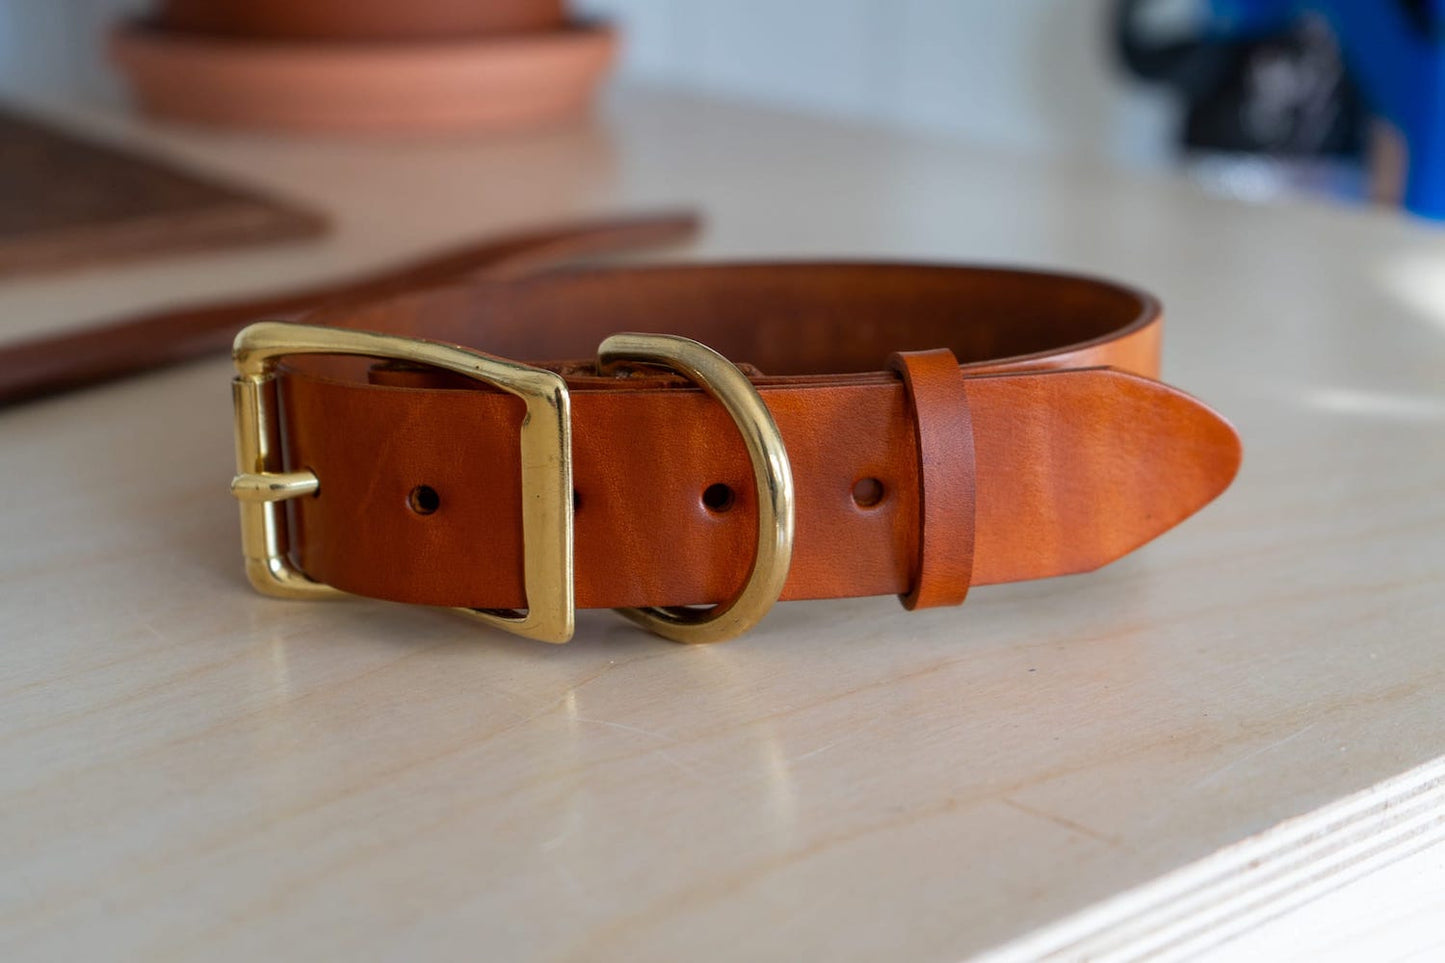 The Leather Belt Keeper